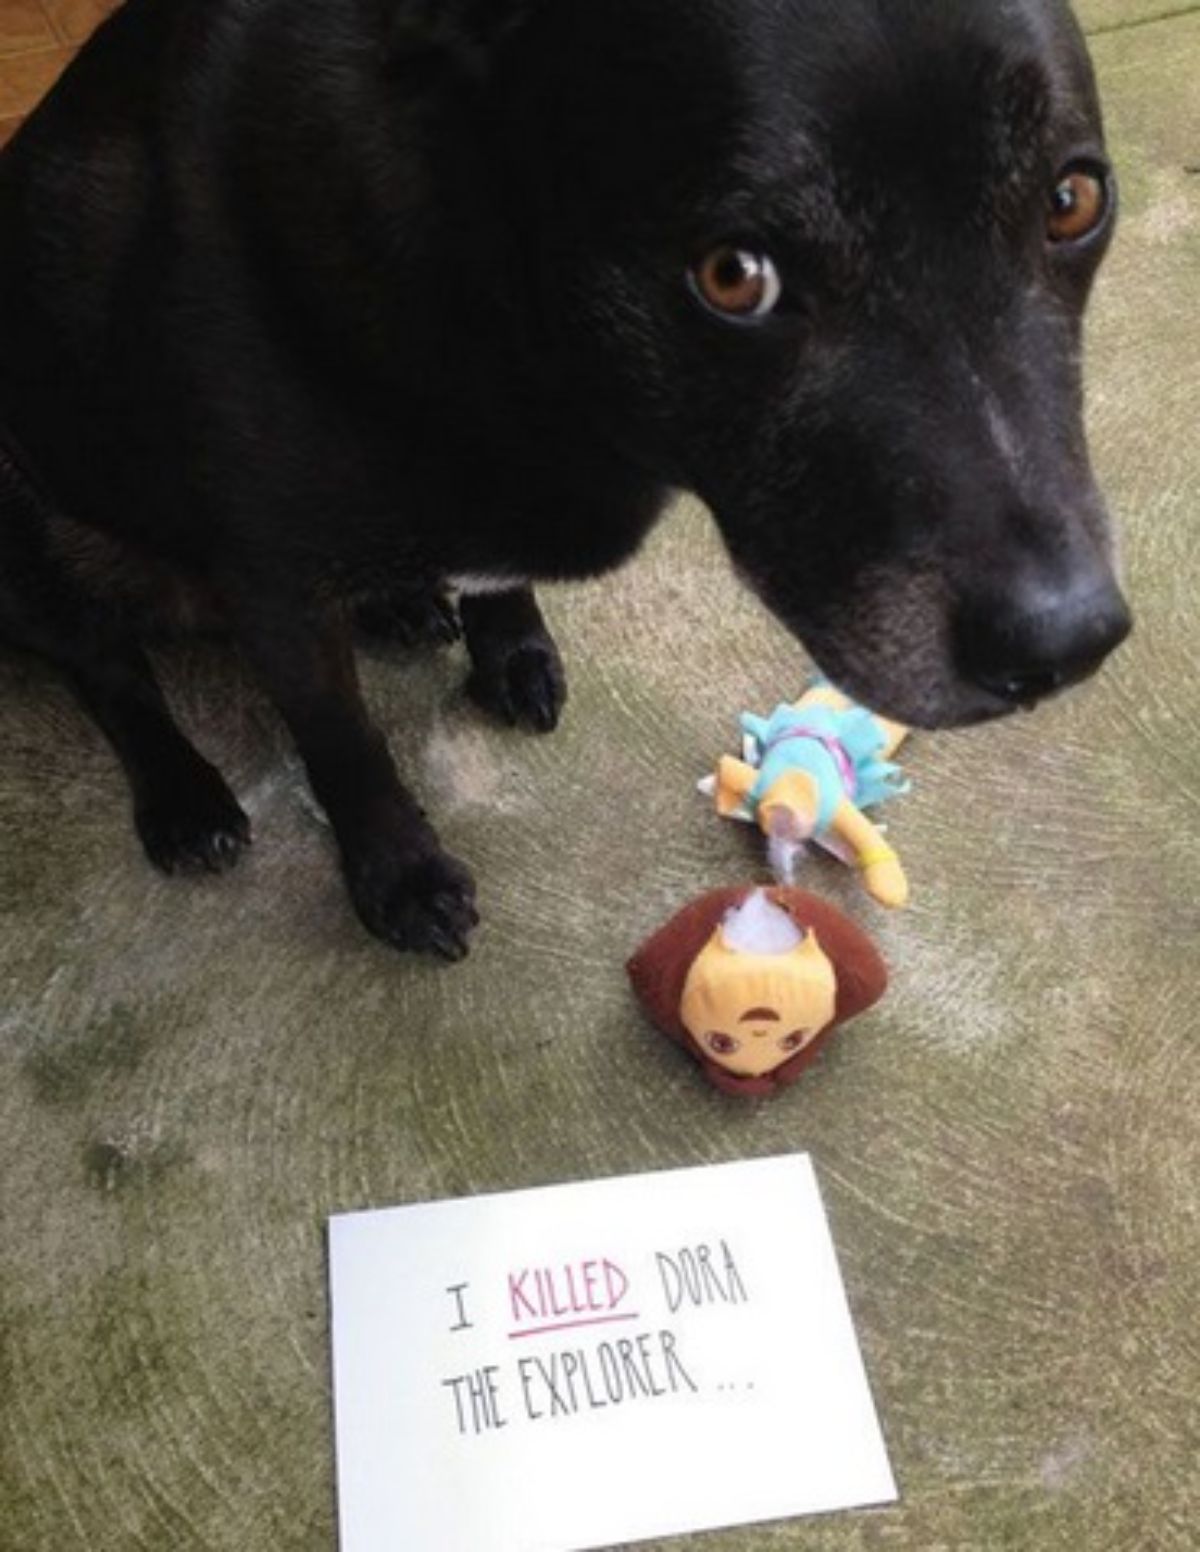 black dog sitting next to a dora the explorer toy with the head torn off with a note saying "I killed Dora the explorer"